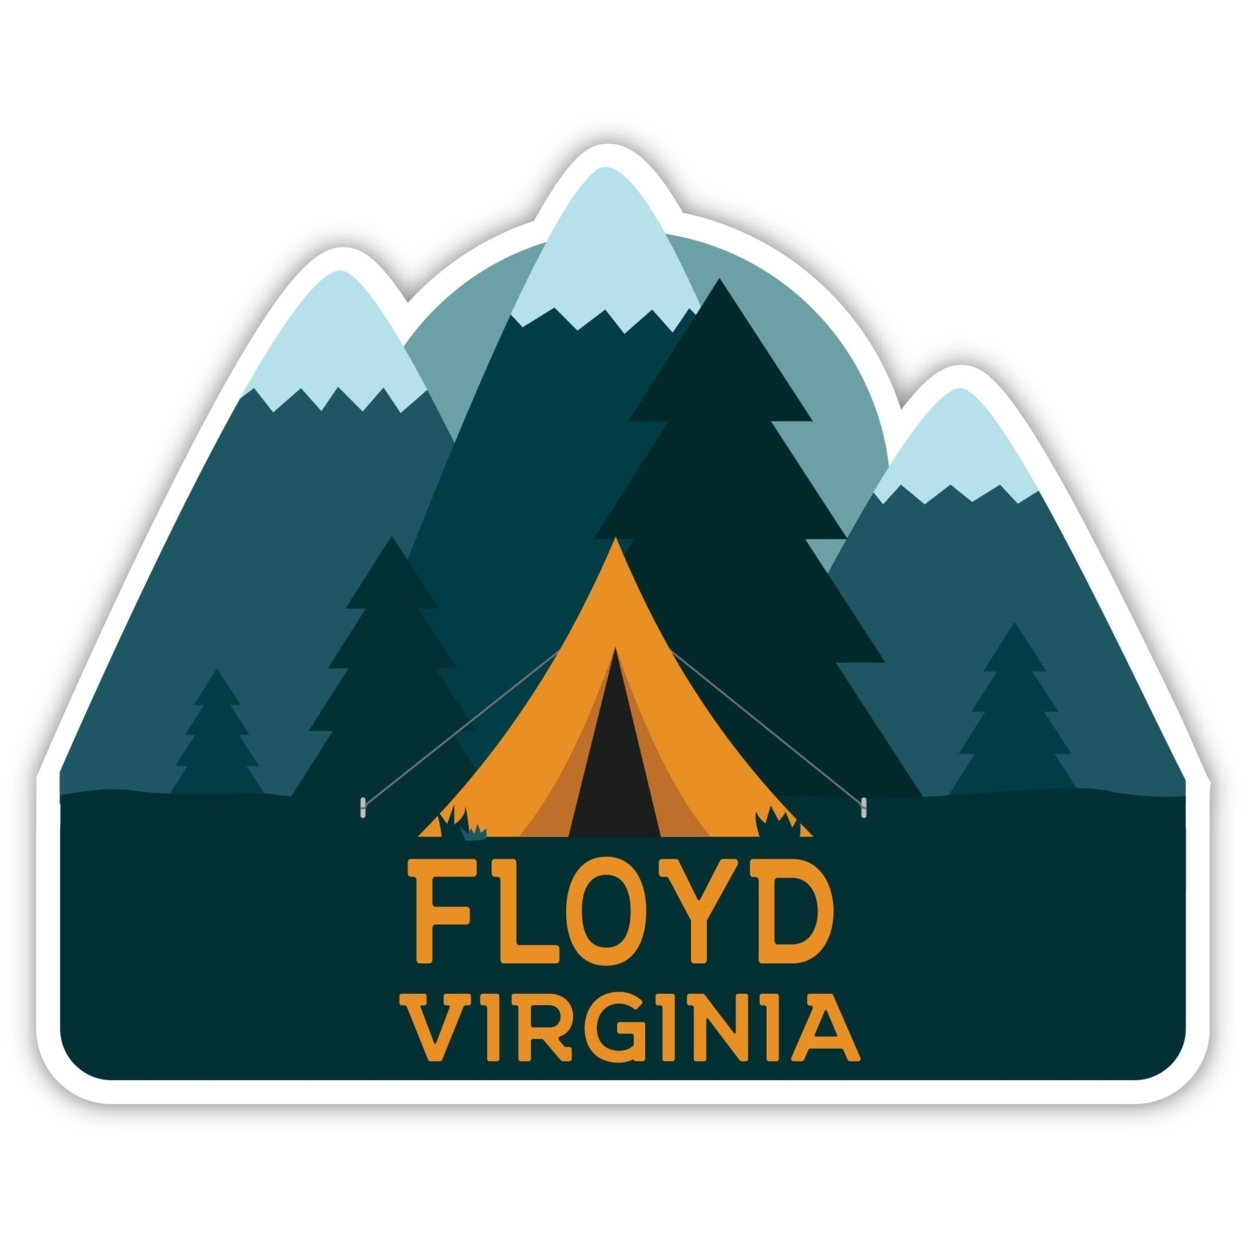 Floyd Virginia Souvenir Decorative Stickers (Choose Theme And Size) - 4-Pack, 6-Inch, Tent